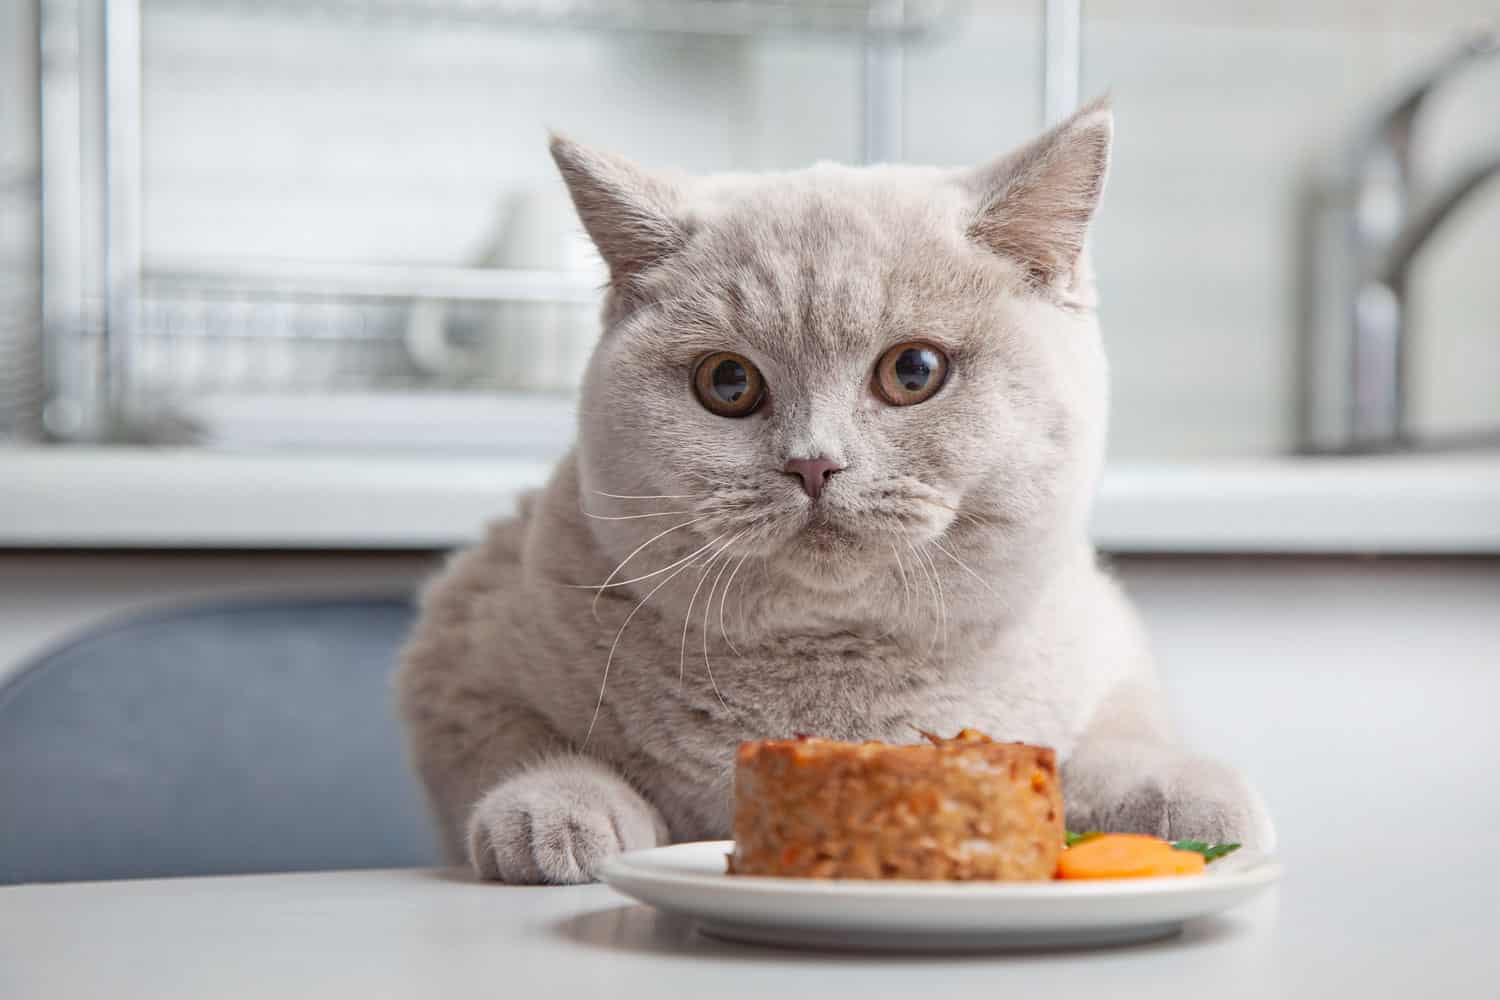 cat and plate of pet food in domestic kitchen, selective focus
